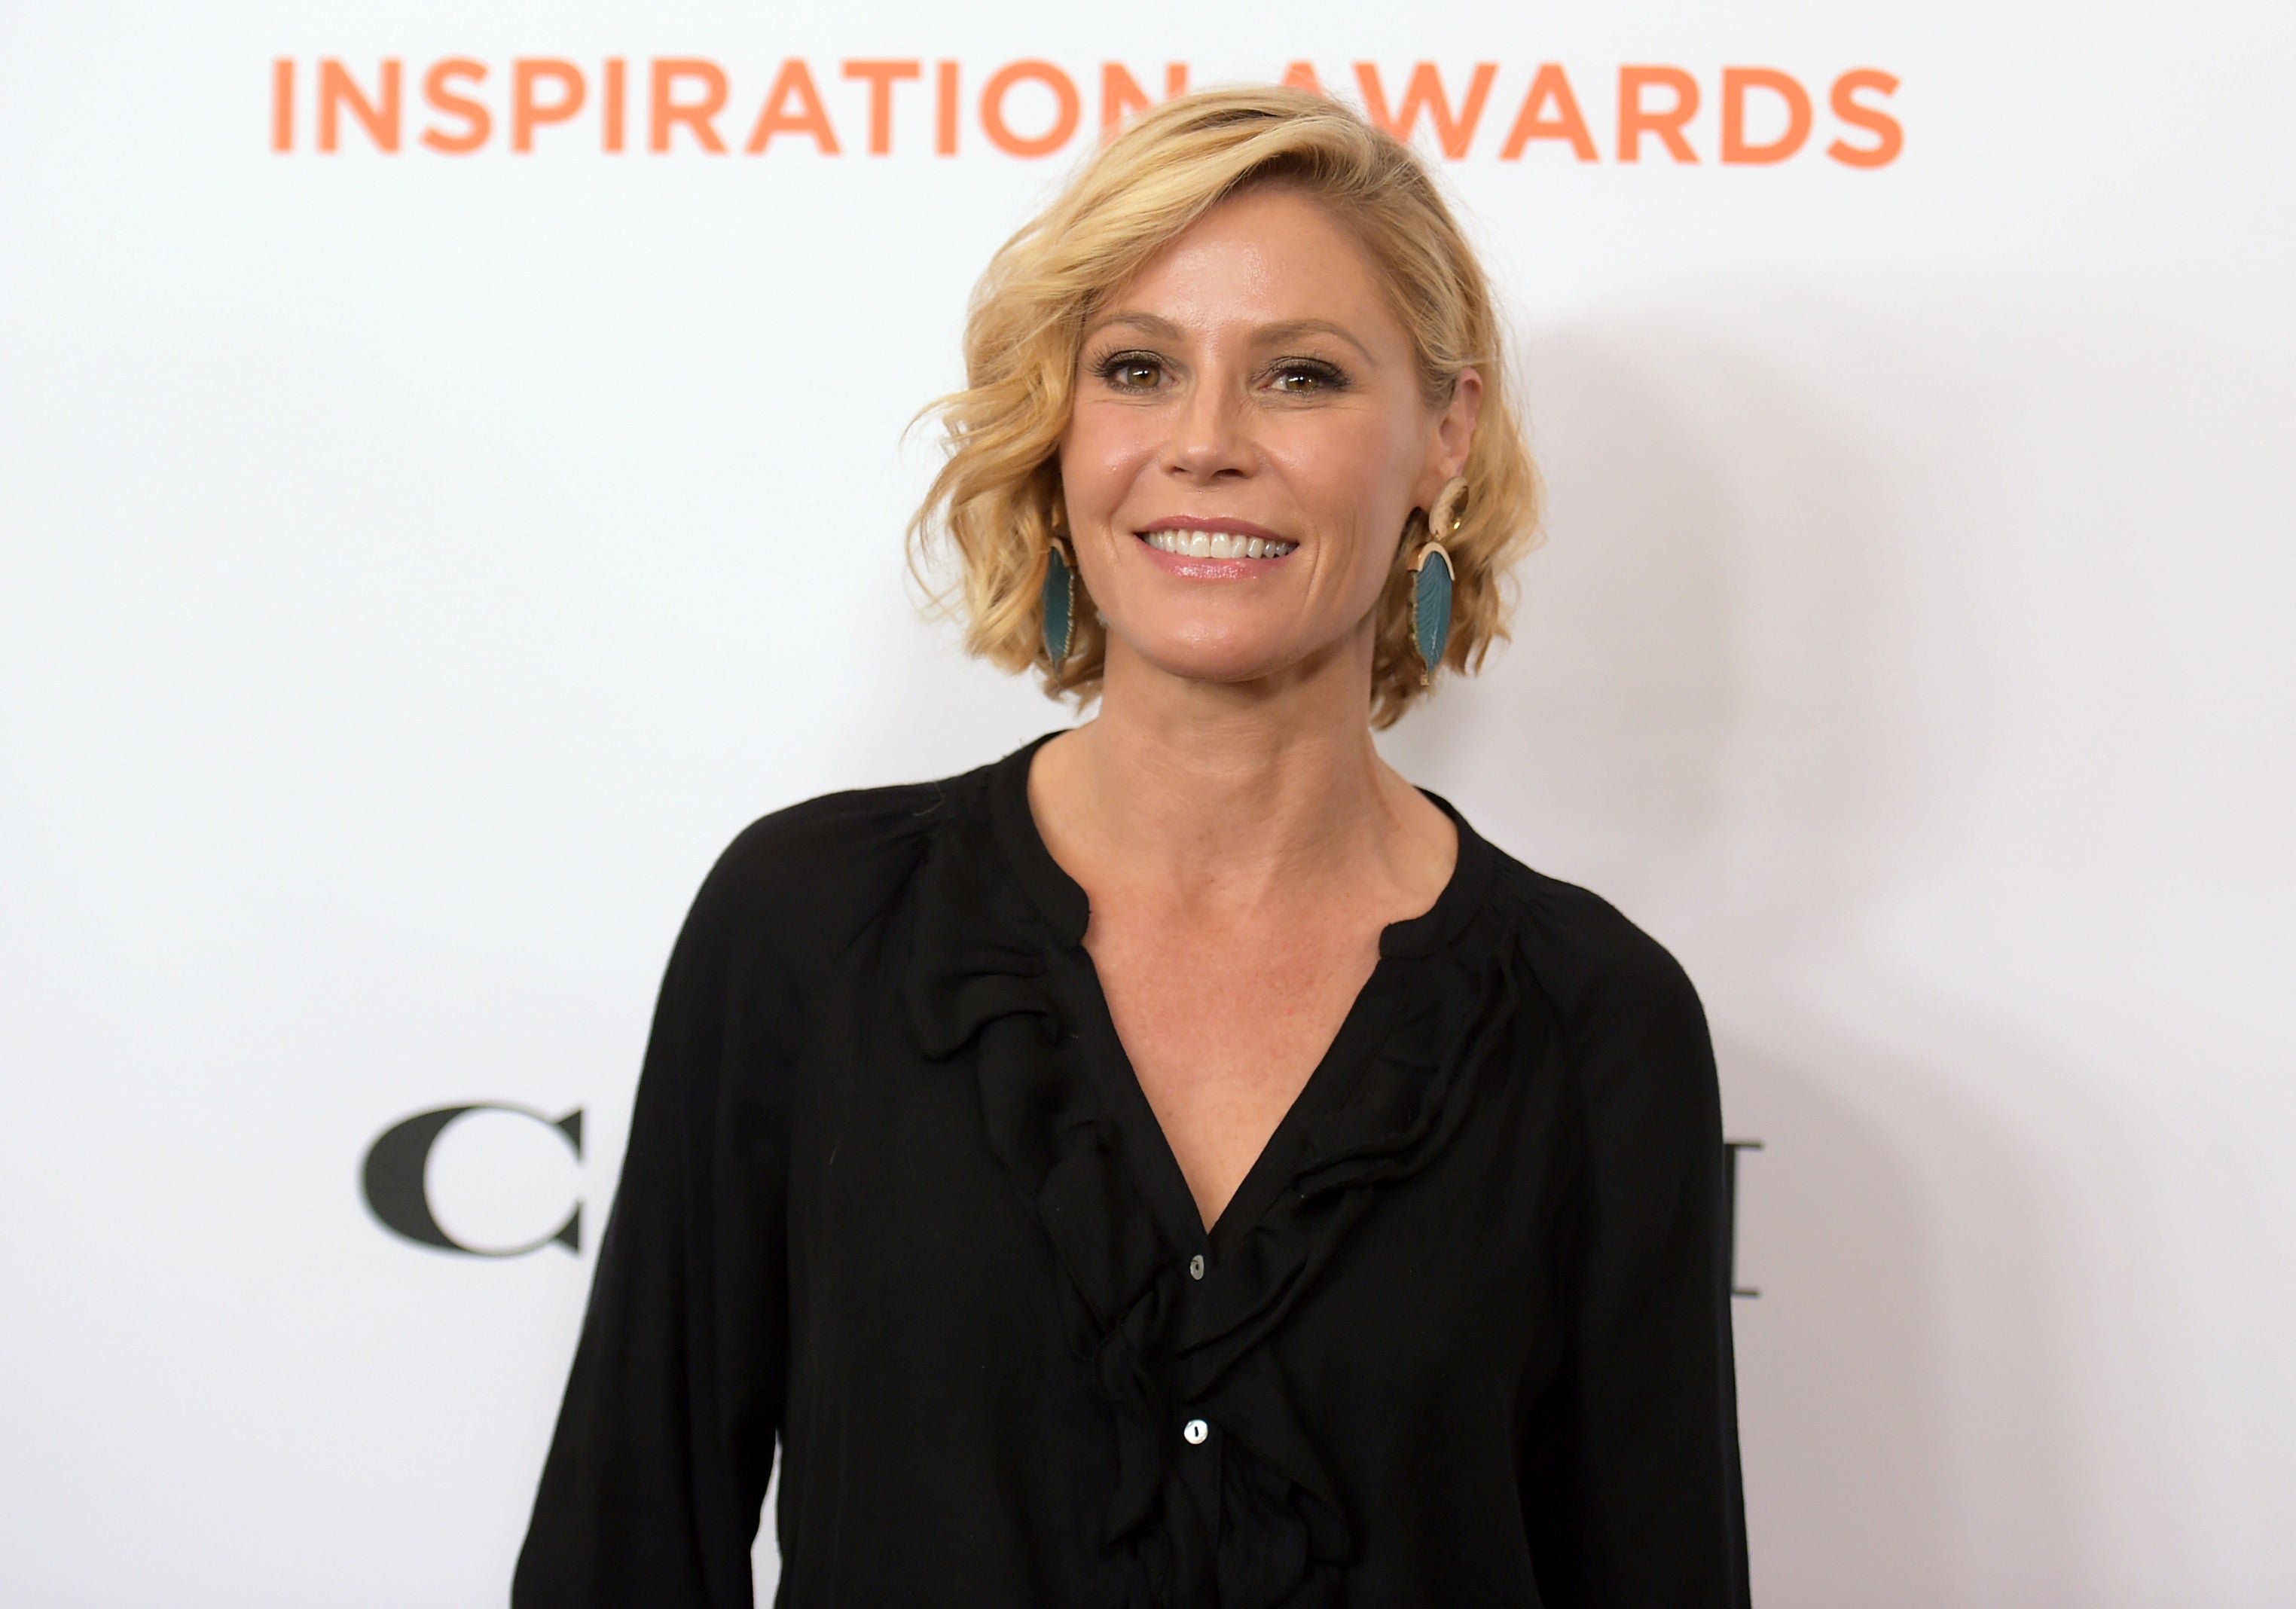 File image: Julie Bowen at the Inspiration Awards benefiting Step Up in Beverly Hills in 2018